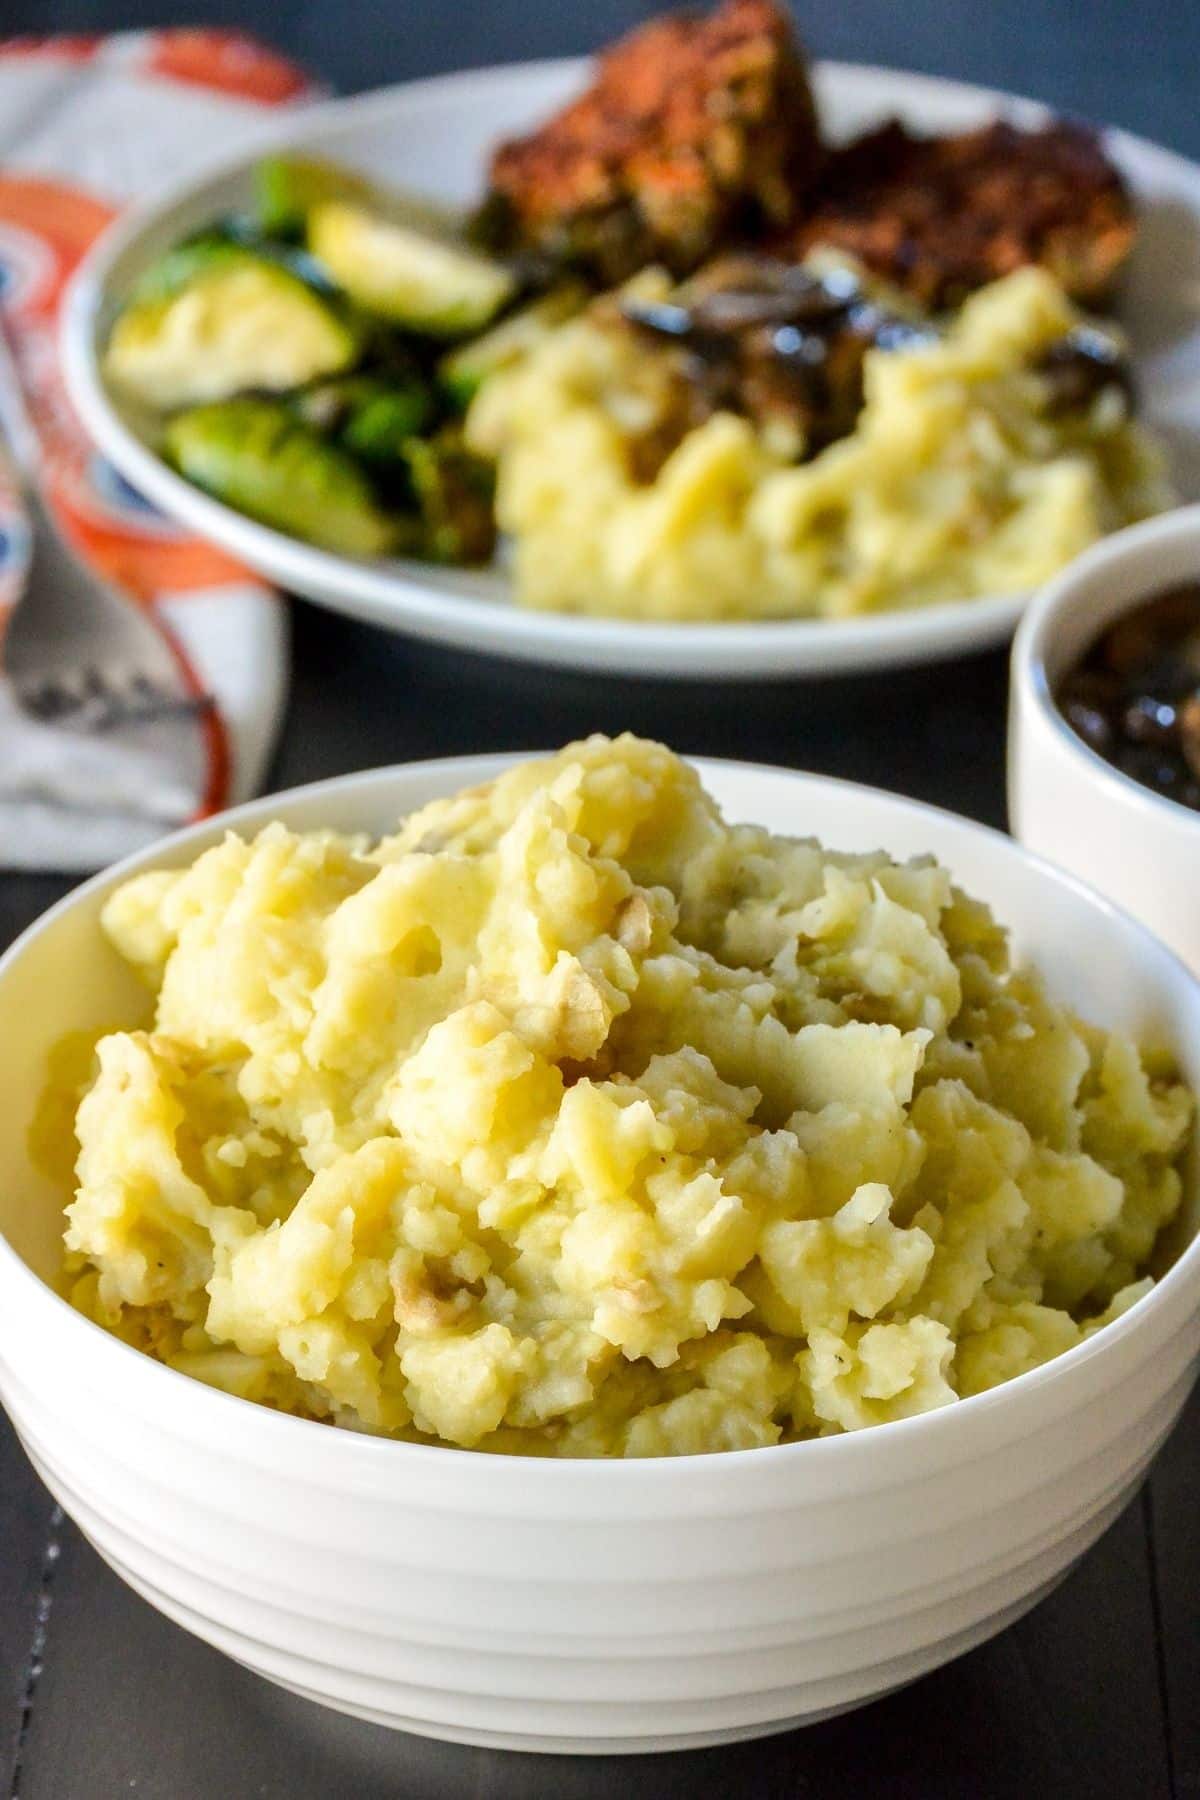 Bowl of mashed potatoes with dinner plate in the background.